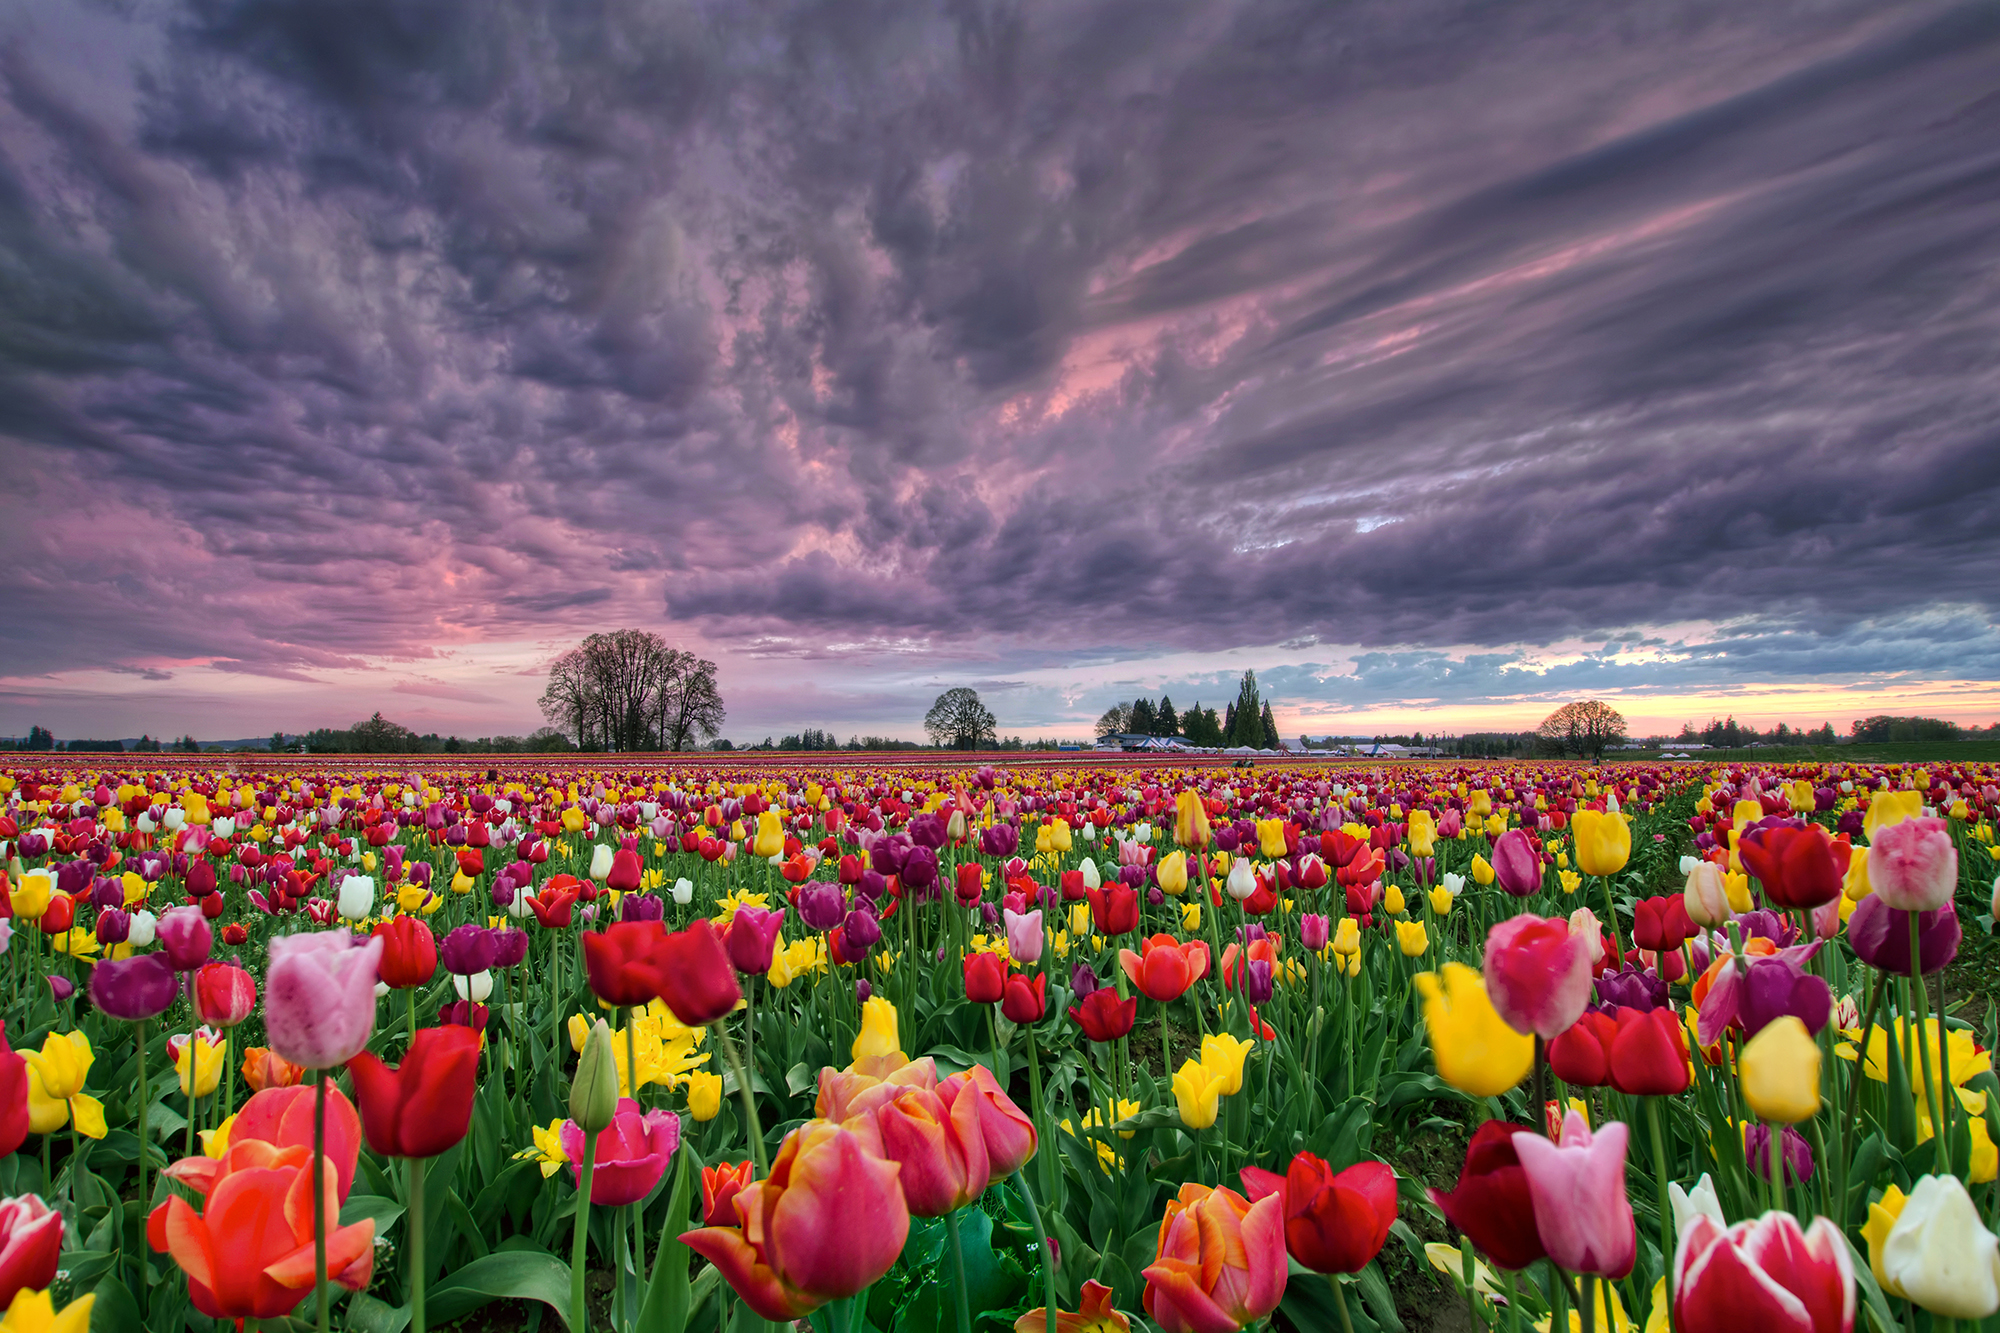 25 Gorgeous Photos of Spring Wildflowers - Sunset Over Tulip Field, Woodburn, Oregon,